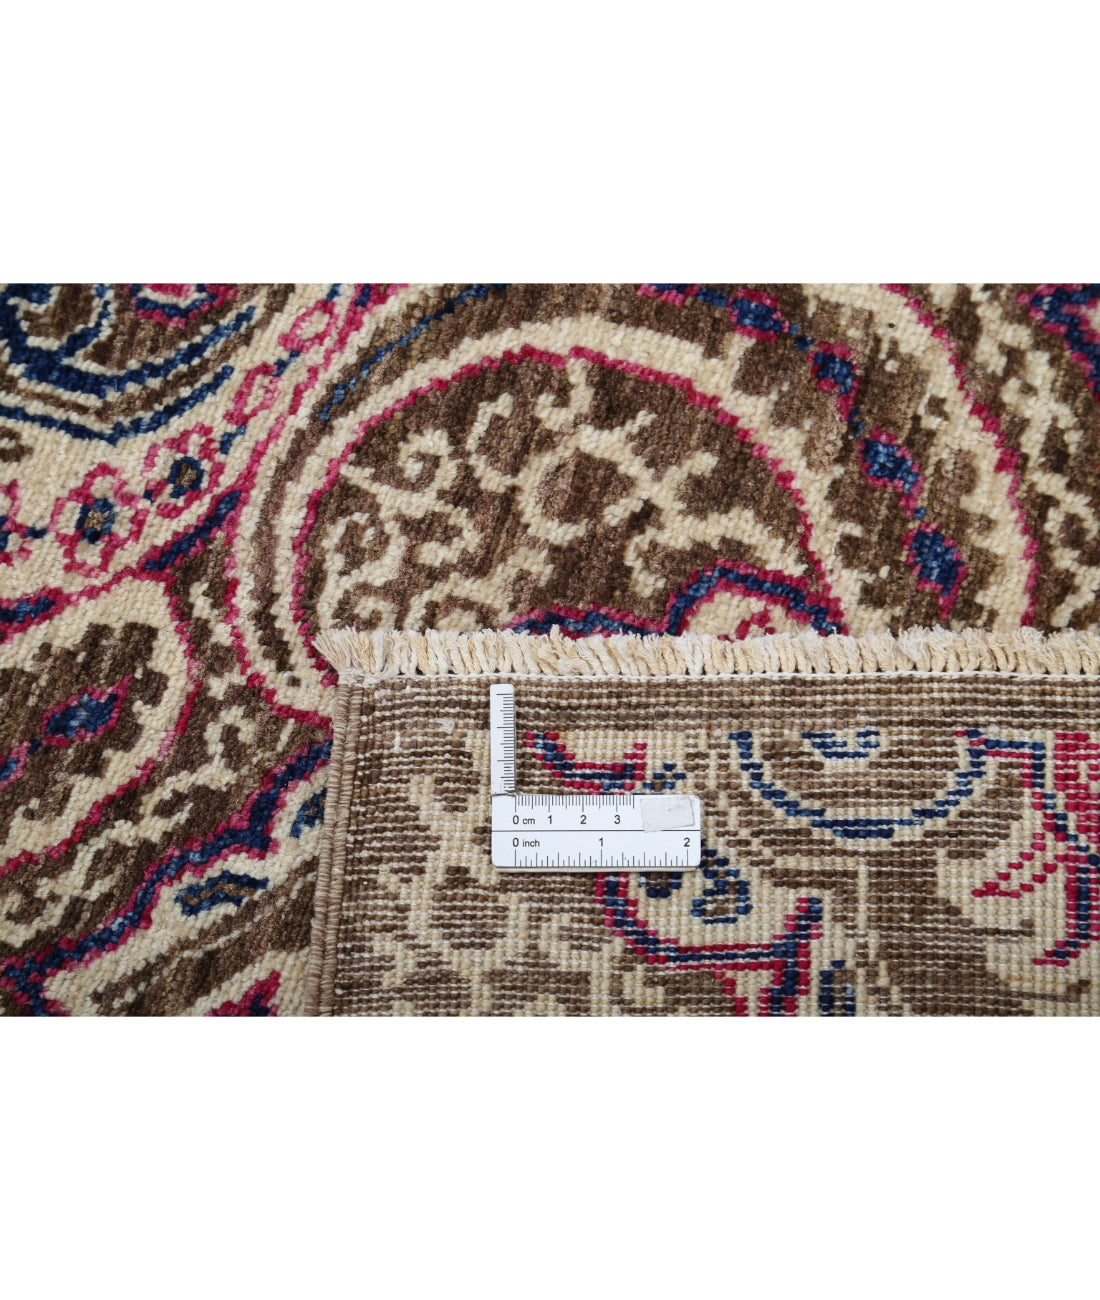 Hand Knotted Artemix Wool Rug - 5'2'' x 11'4'' 5'2'' x 11'4'' (155 X 340) / Brown / Pink